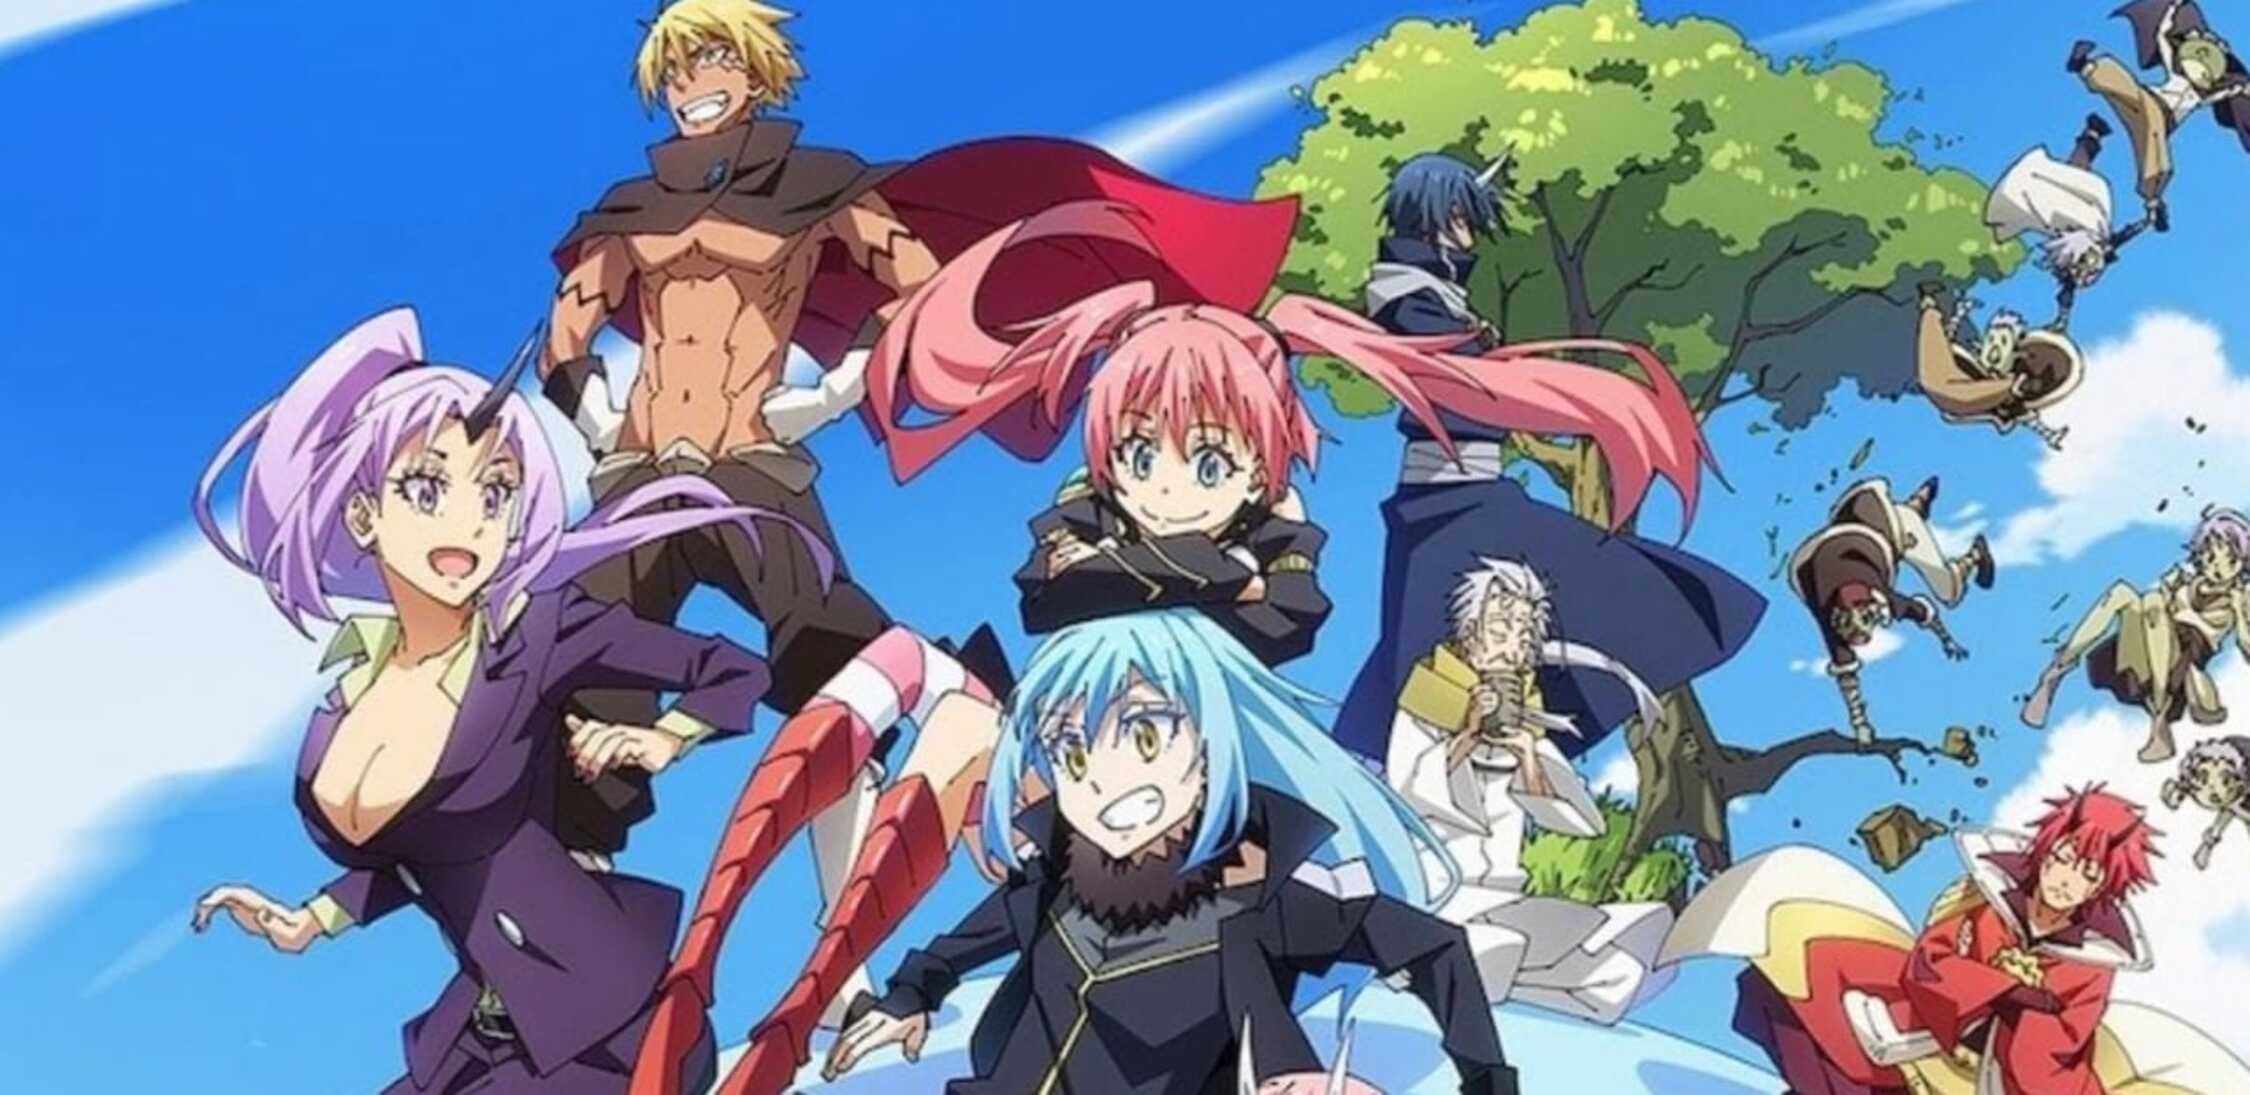 That Time I Got Reincarnated as a Slime still